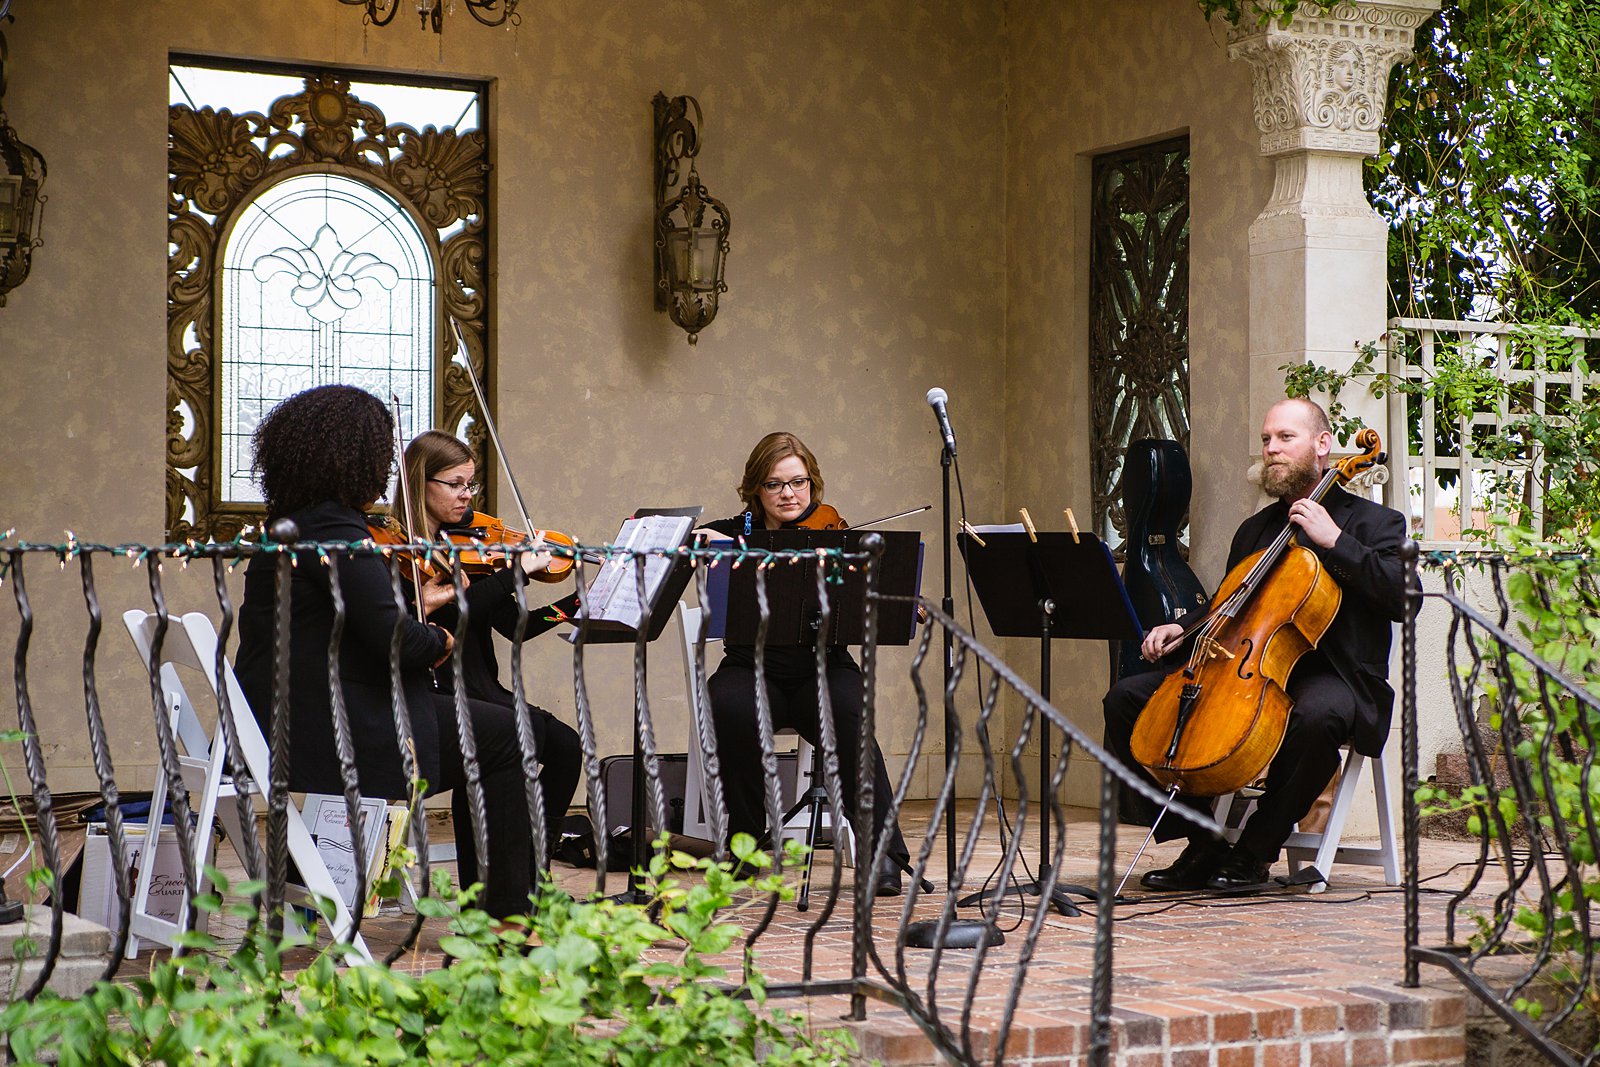 Quartet playing to greet guests to this garden wedding ceremony by PMA Photography.